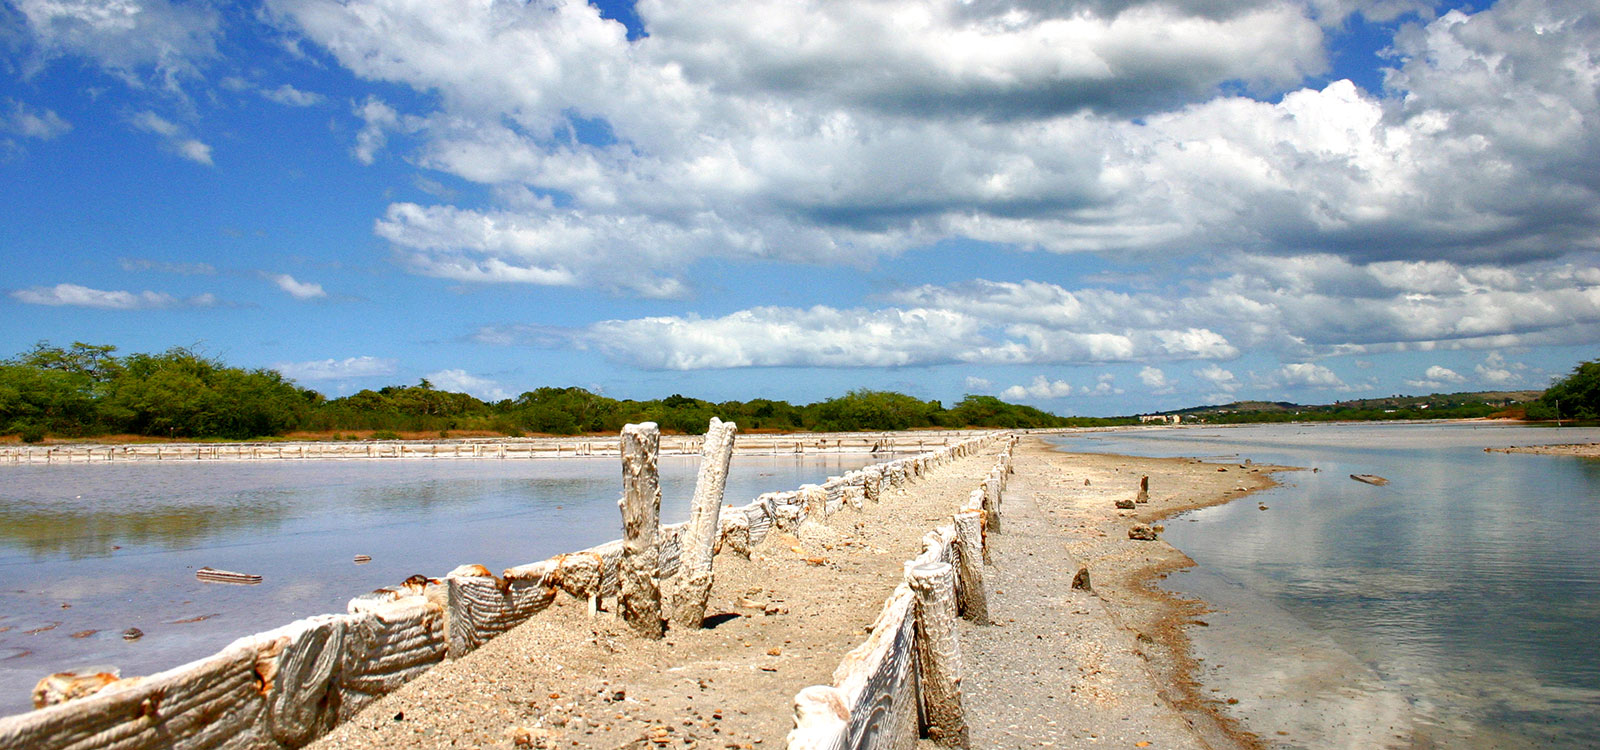 cabo-rojo-nwr_formattedwp